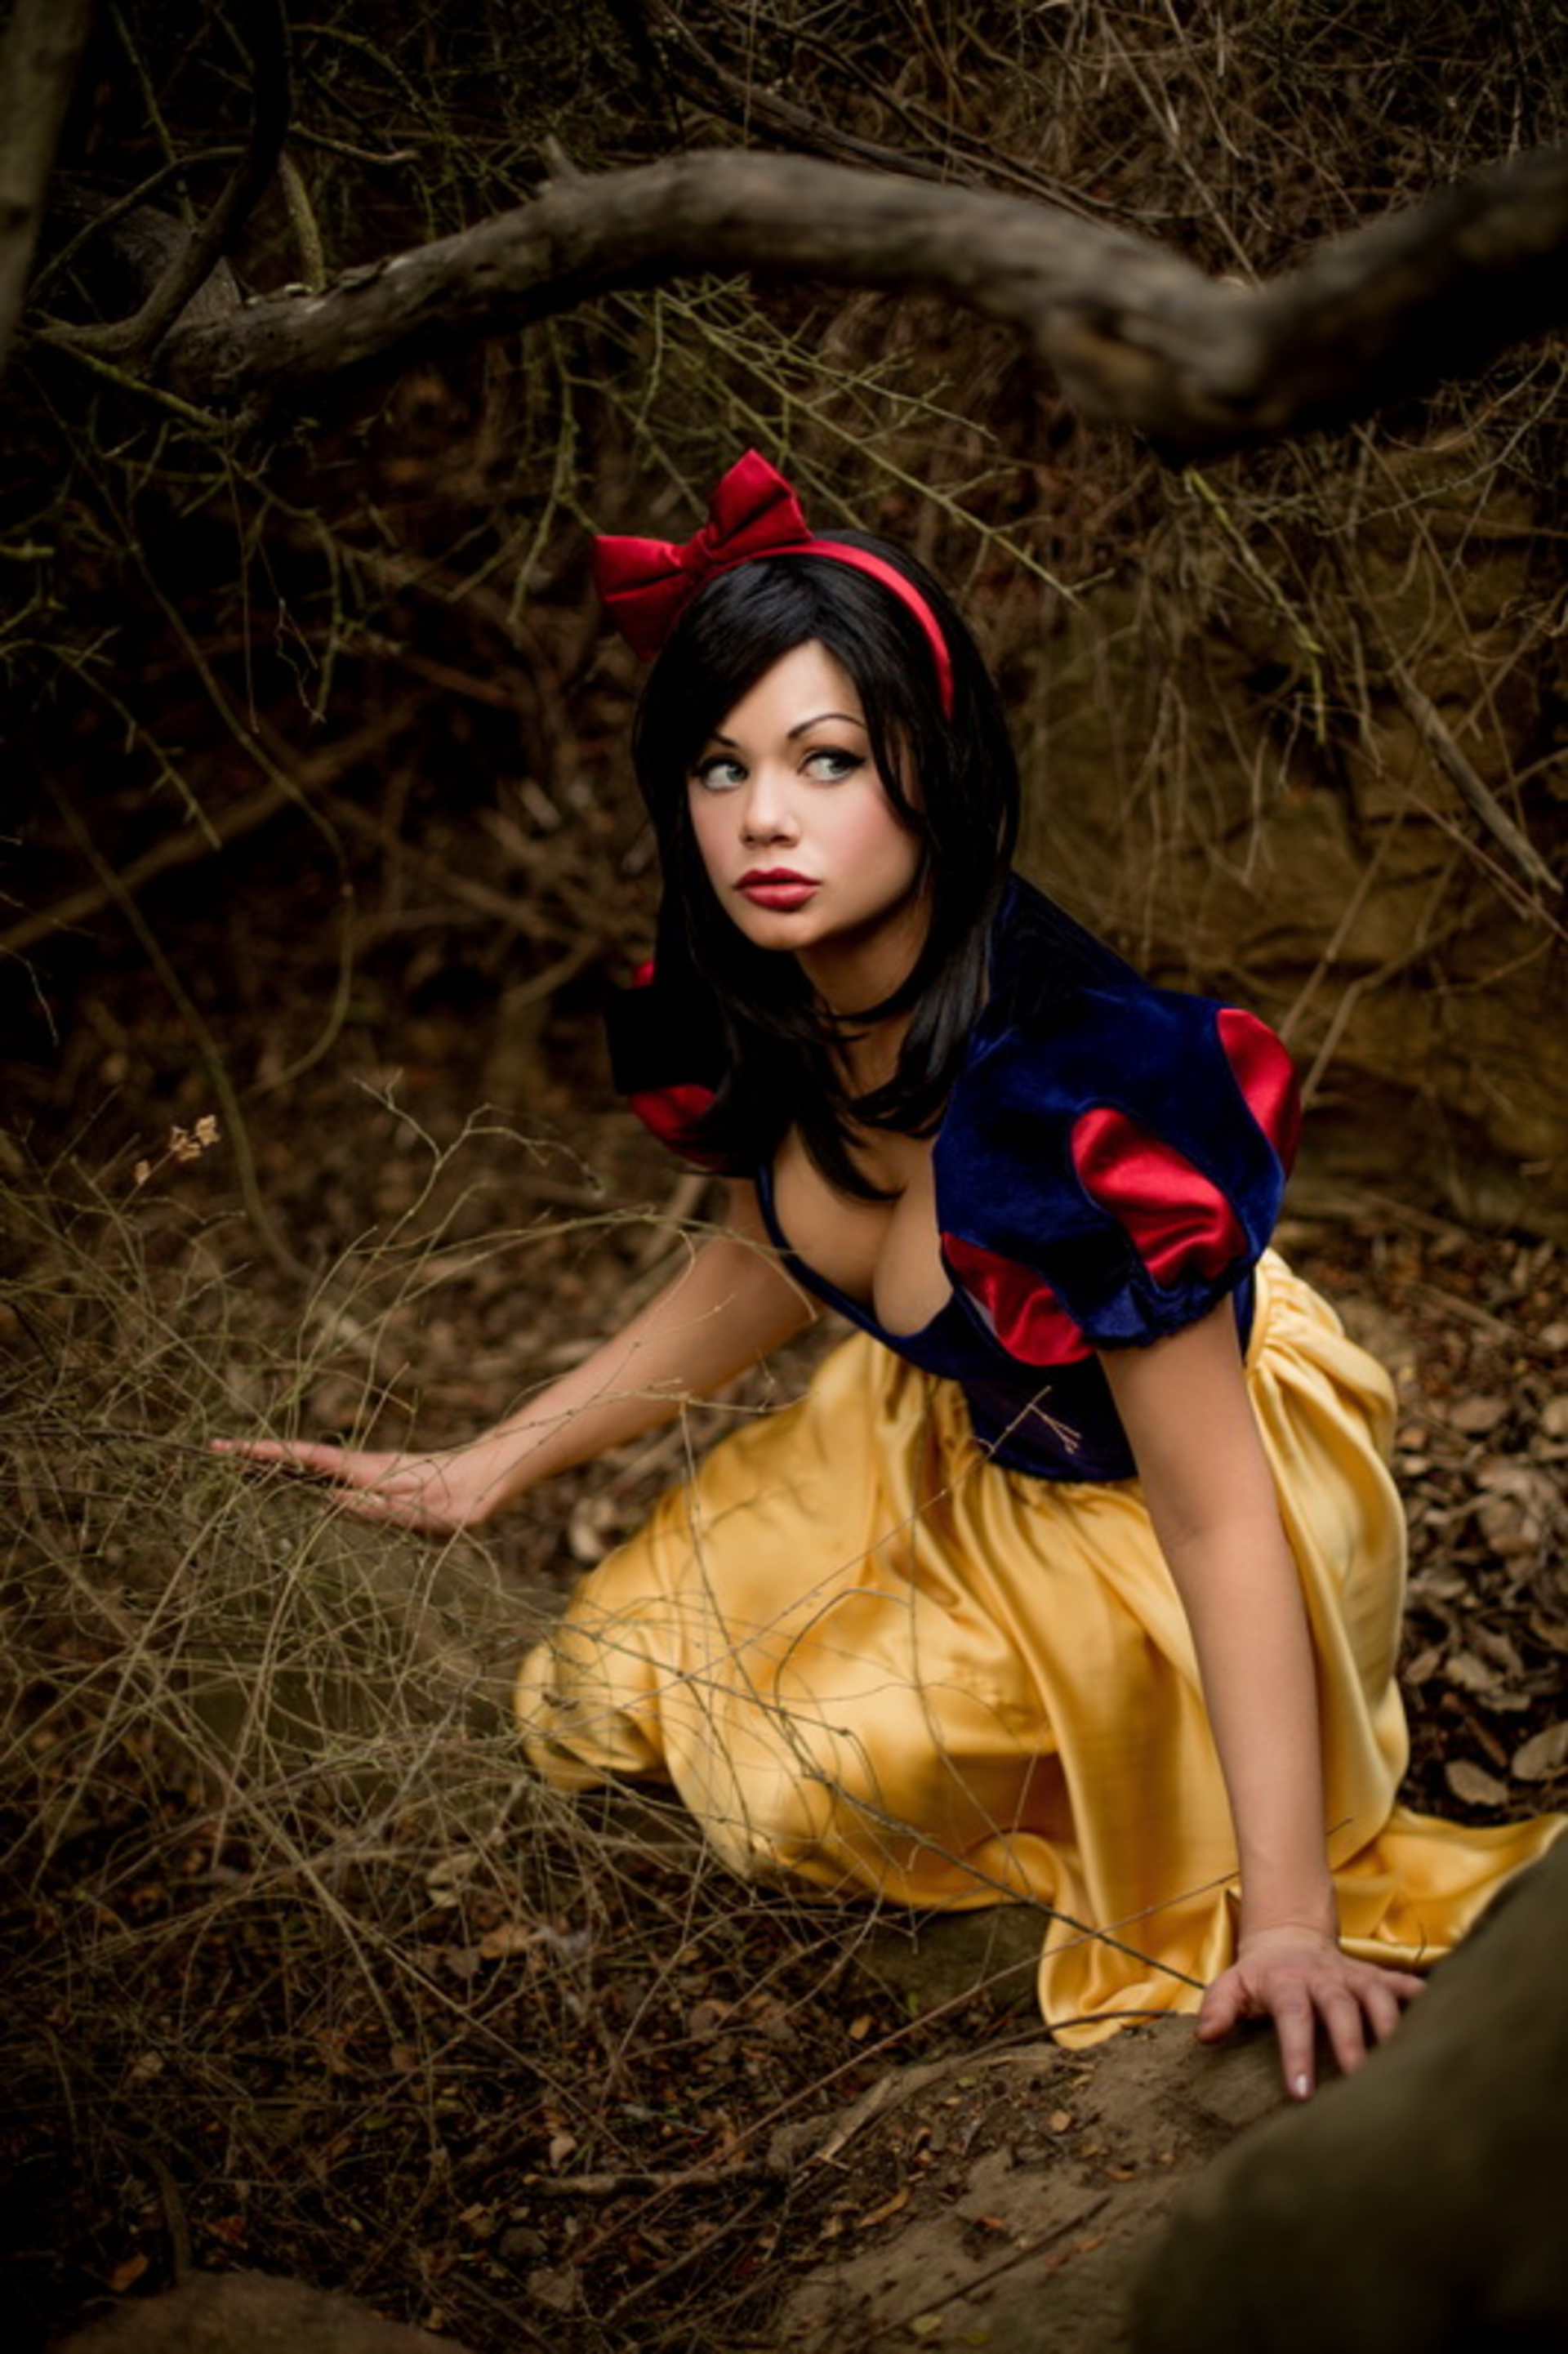 A stoned review of Snow White XXX | Tampa Bay News | Tampa | Creative  Loafing Tampa Bay